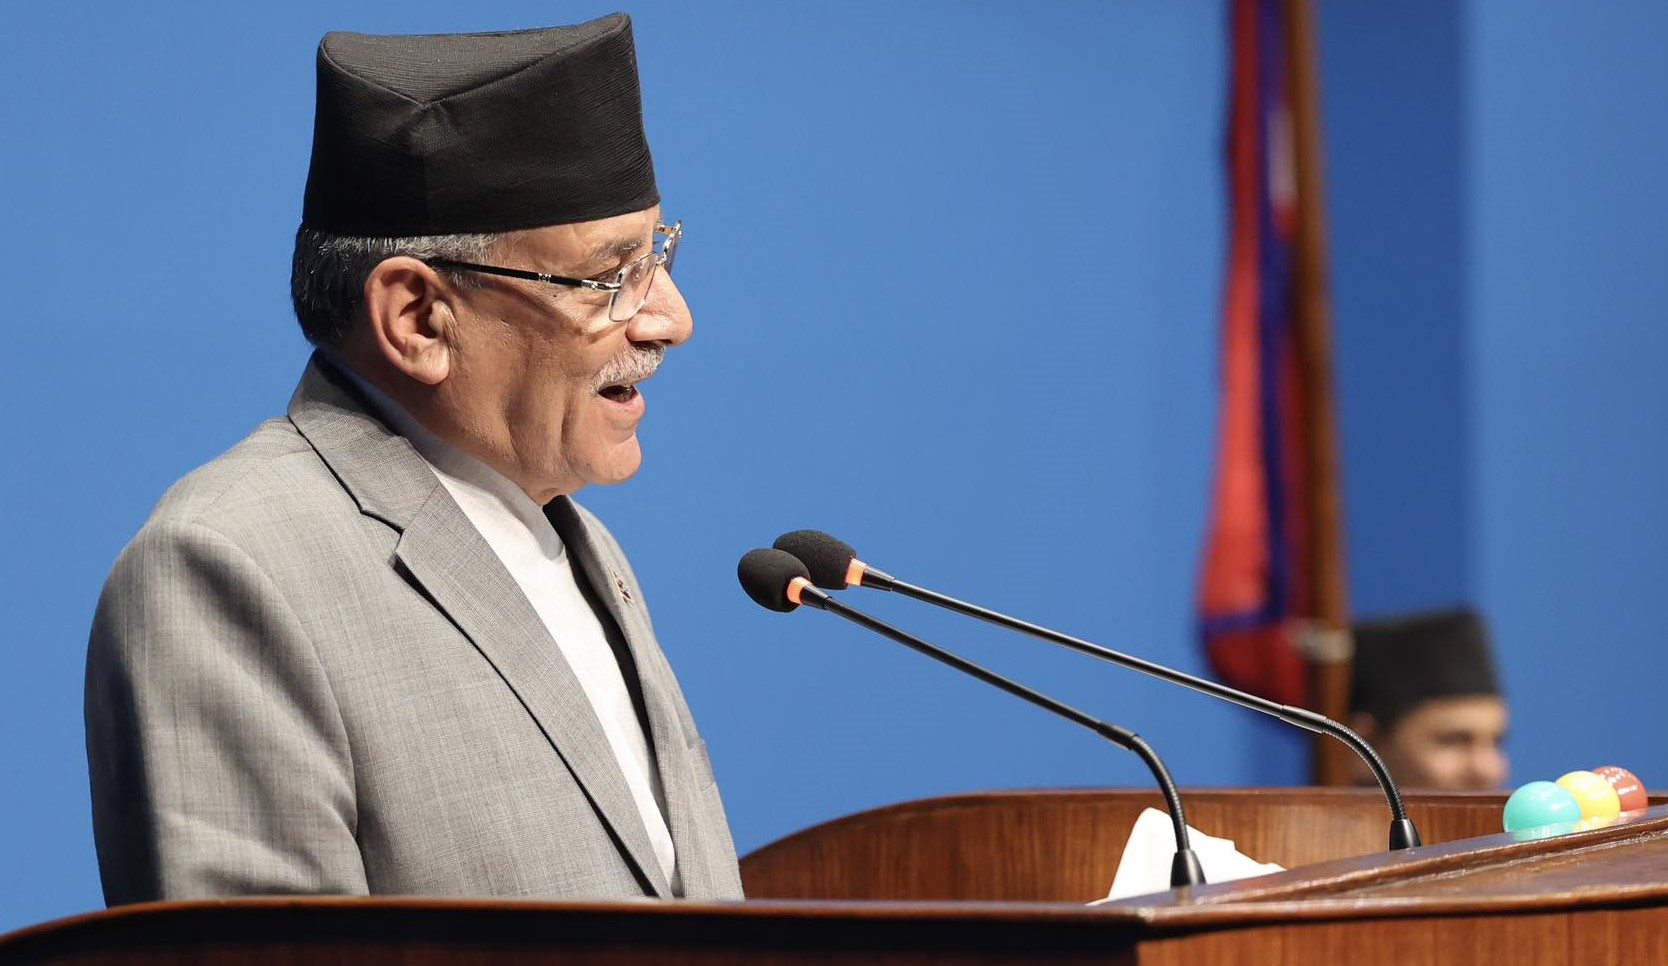 No cantonment corruption; will face jail if proven: PM Dahal